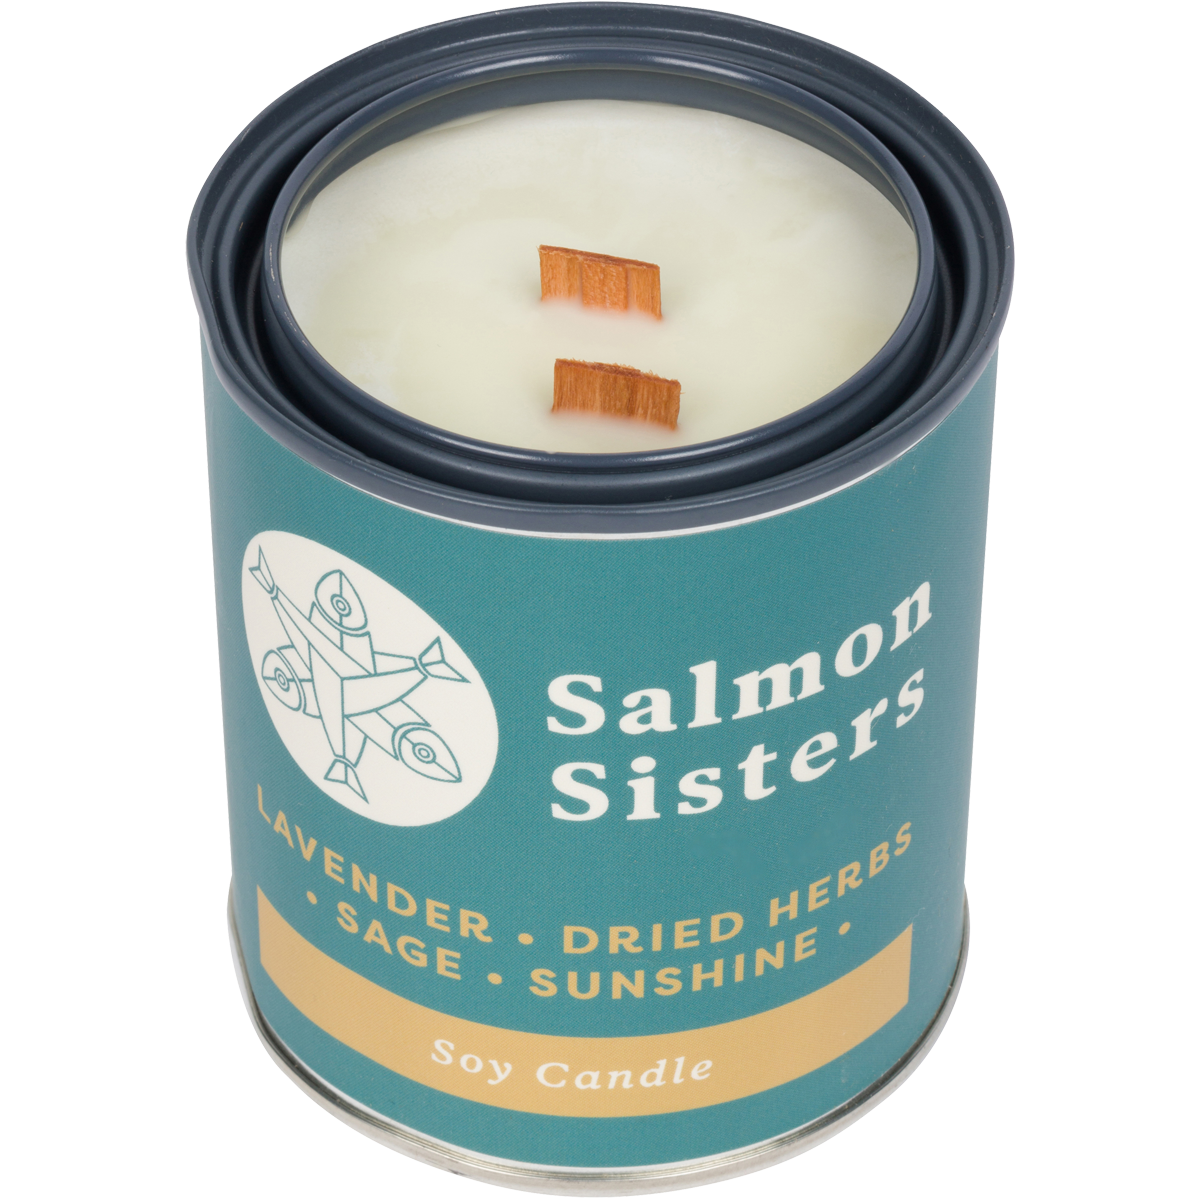 Salmon Sisters Soy Candle